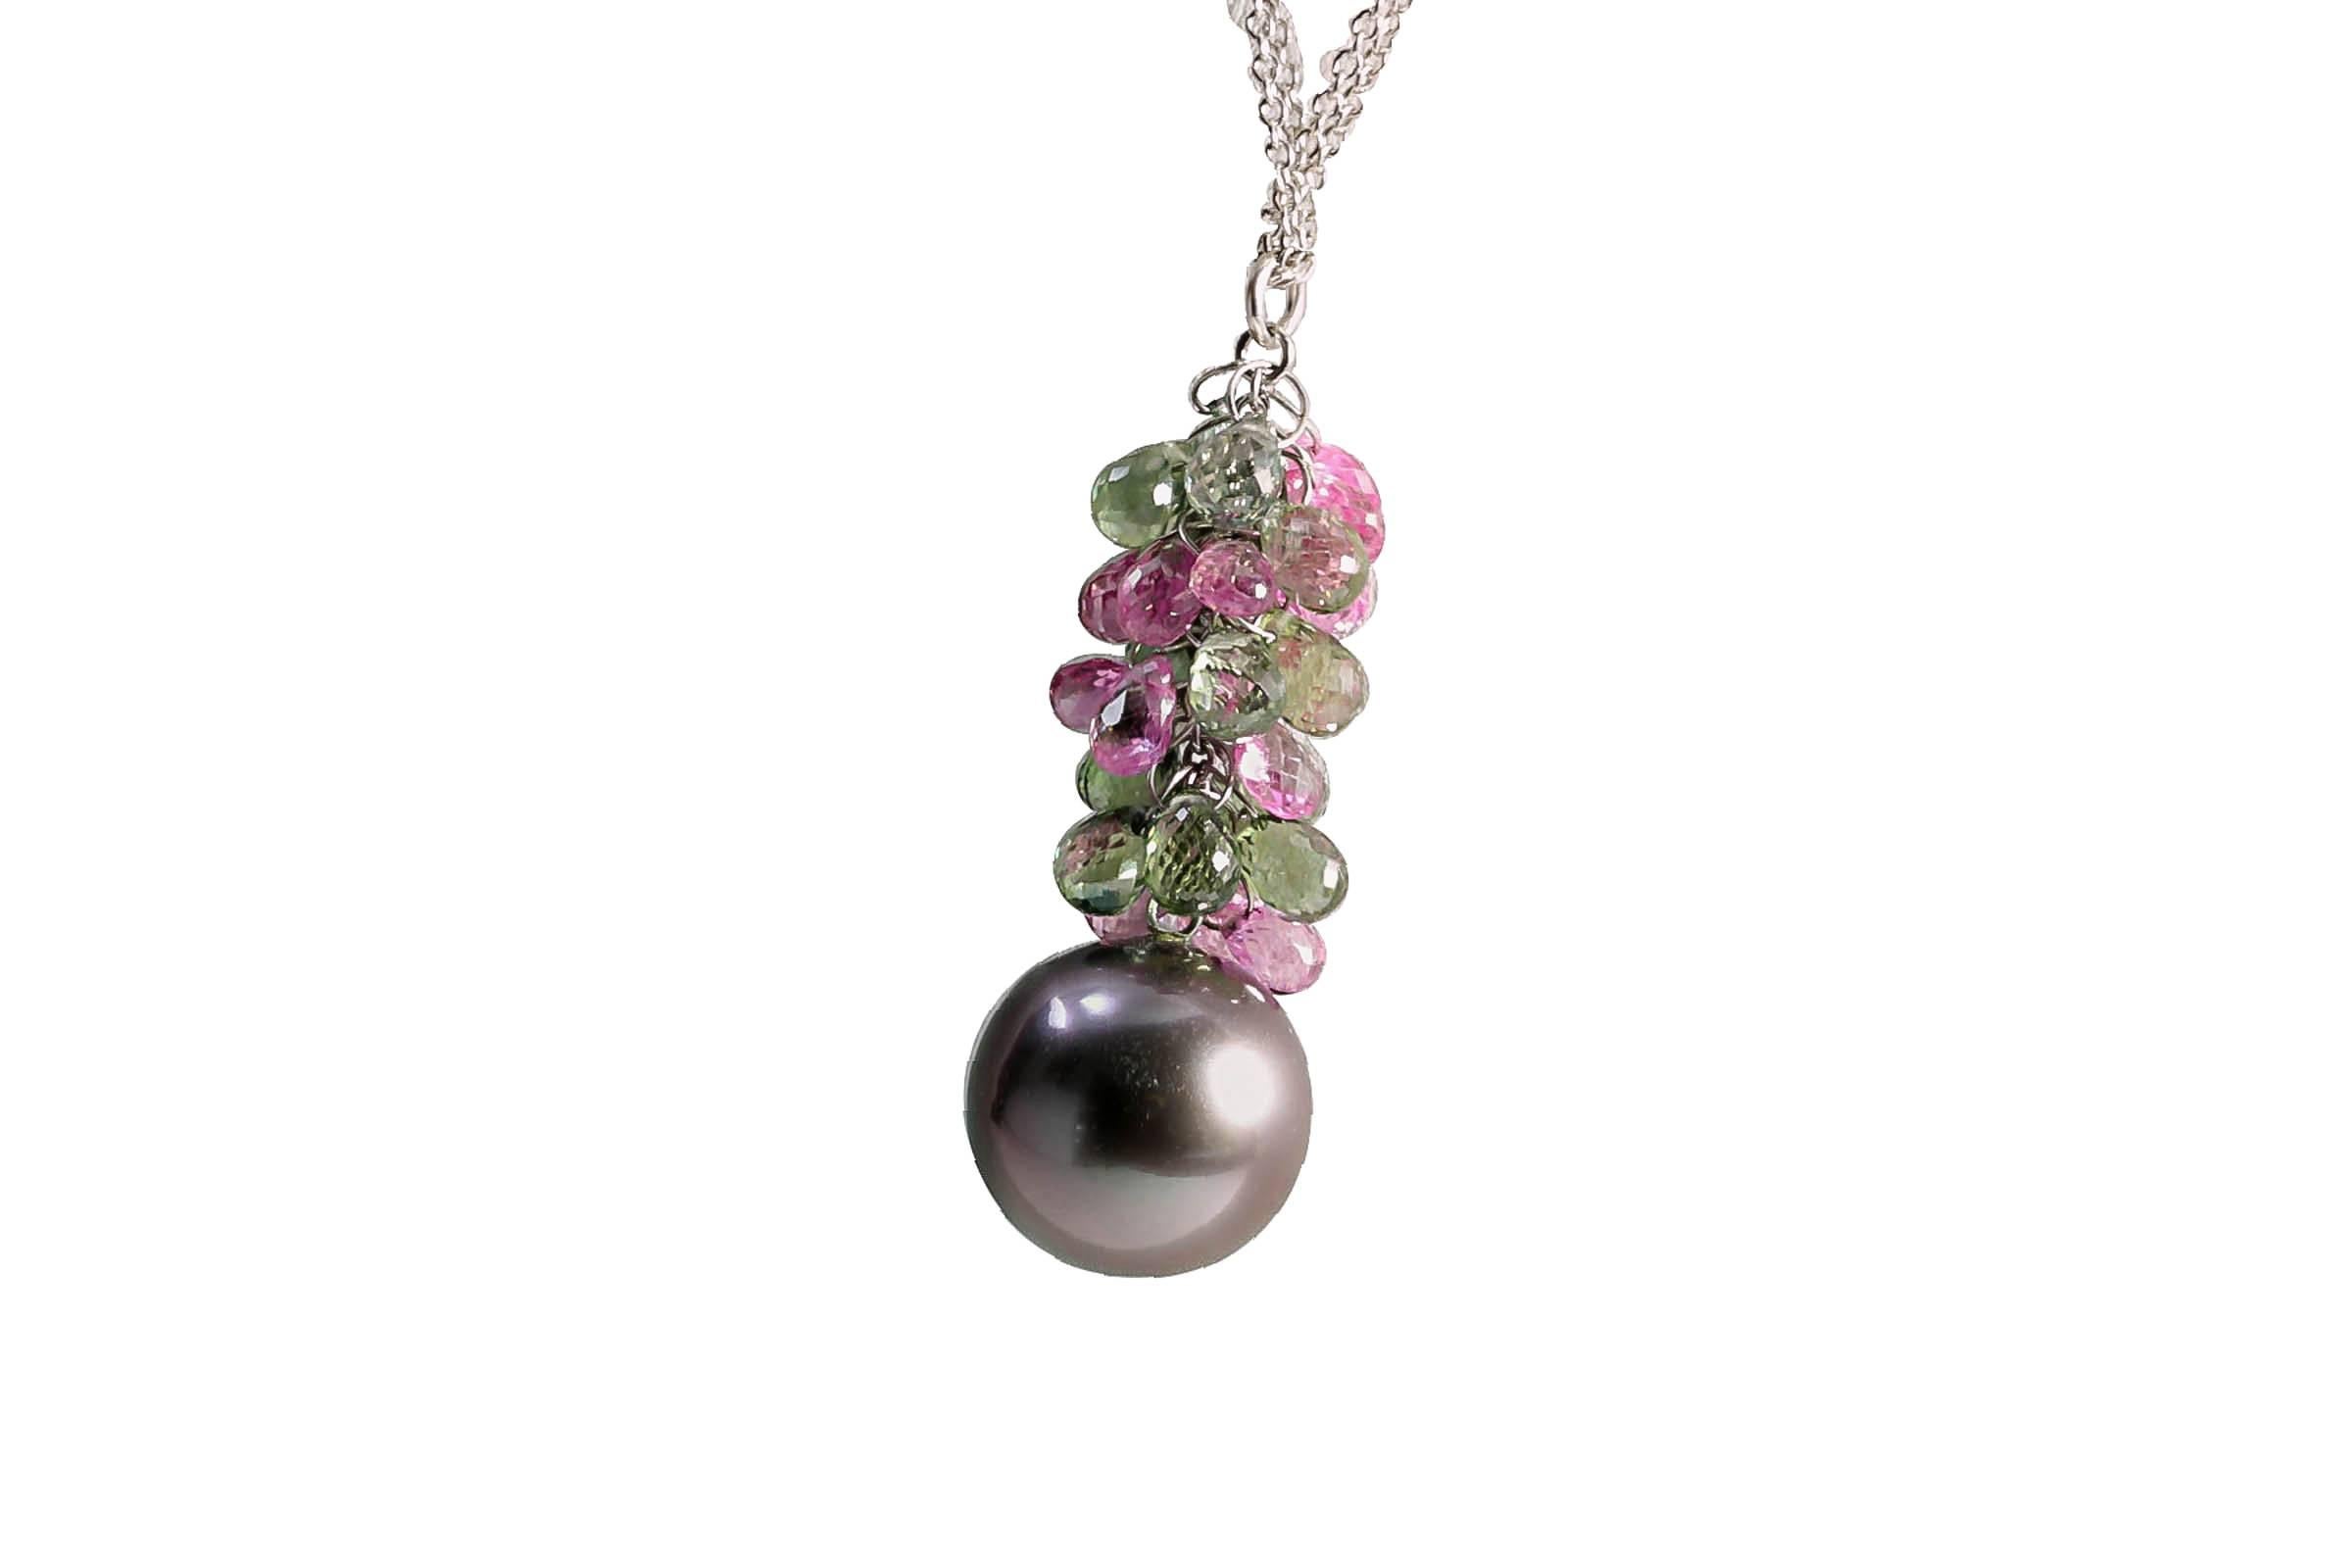 18K white gold double chain necklace with a 12 mm cultured black pearl and semi-precious briolettes pendant.
The chain is 16 1/2  long and the pendant is 1 1/4 long.